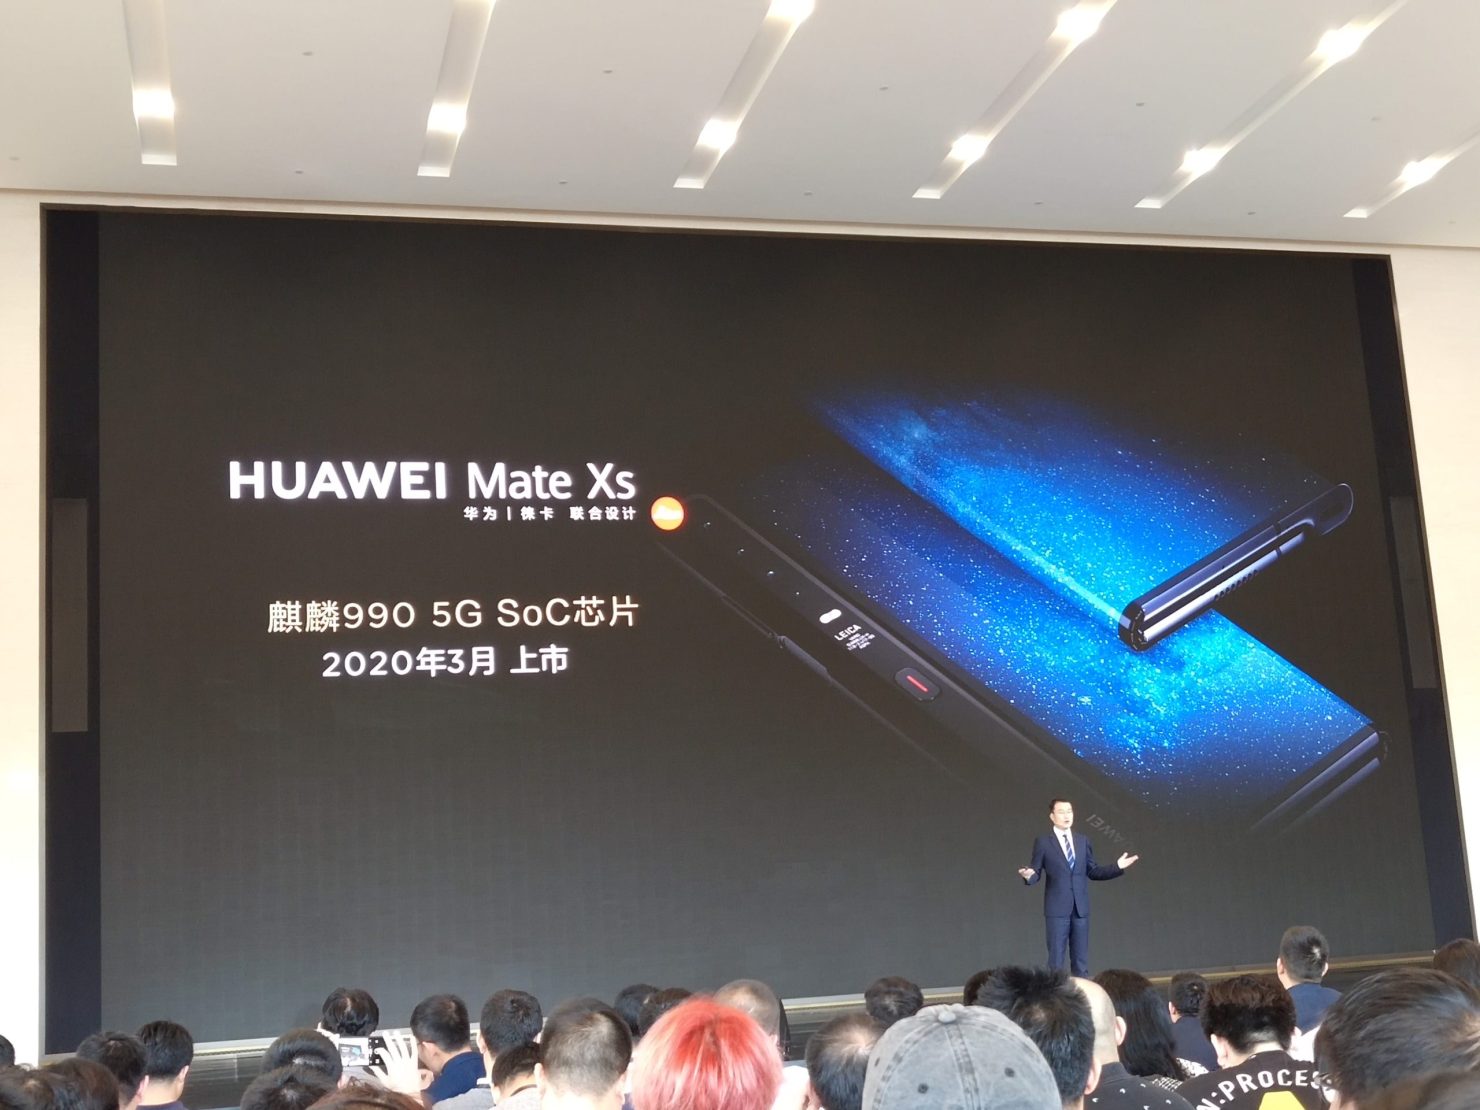 The HUAWEI Mate Xs is also coming next year.